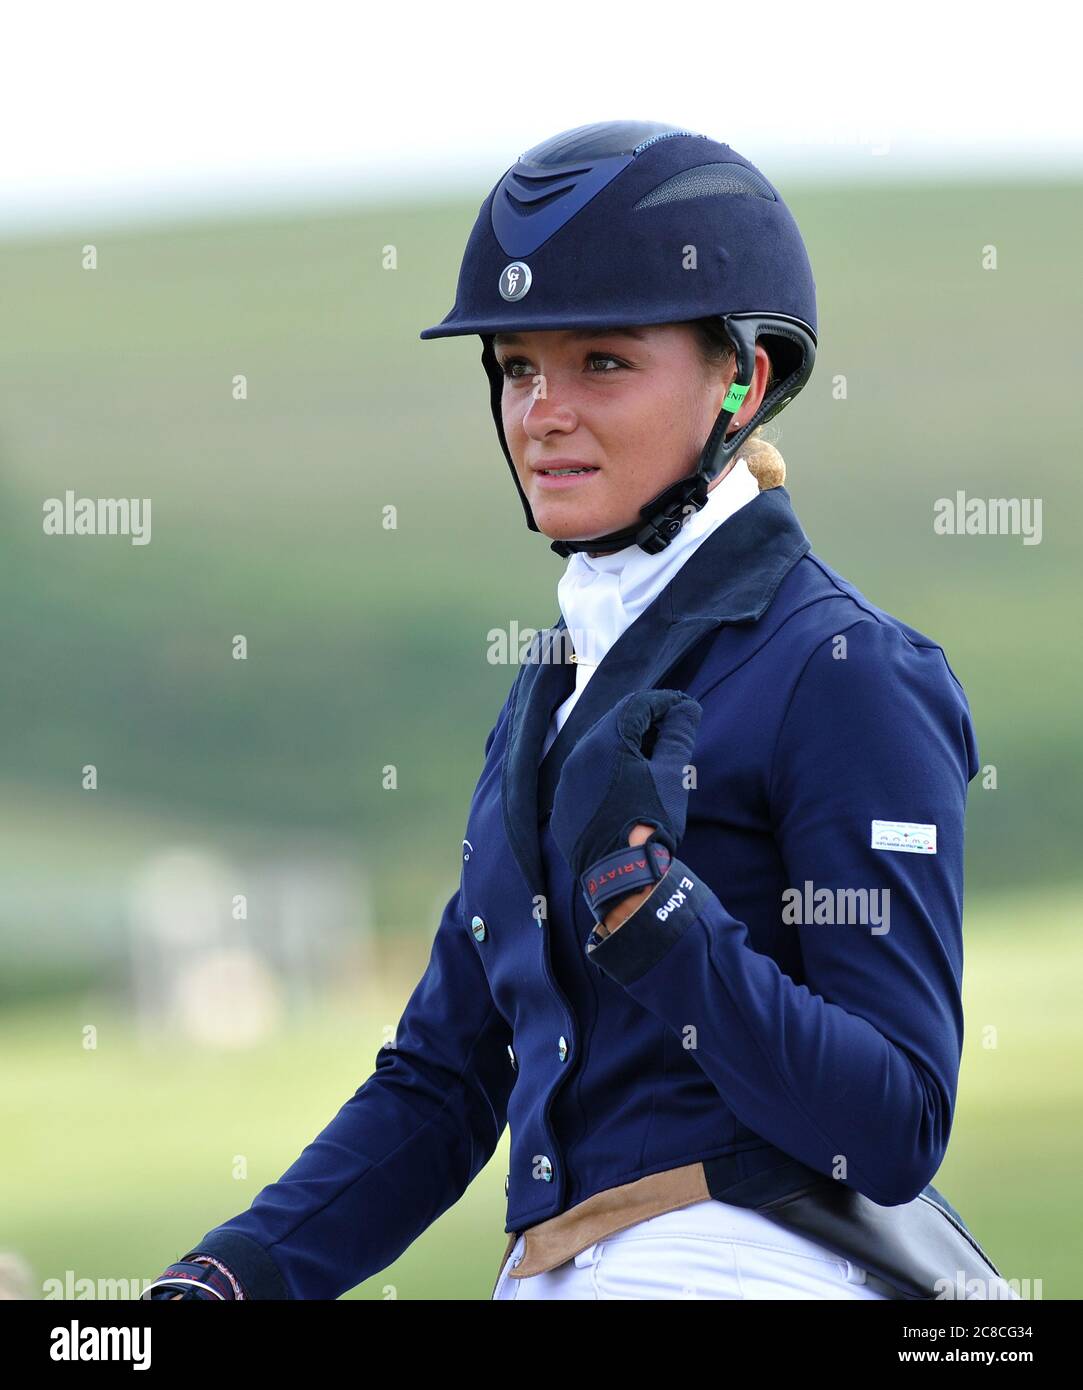 Emily King British Equestrian rider competing at Eventing Stock Photo